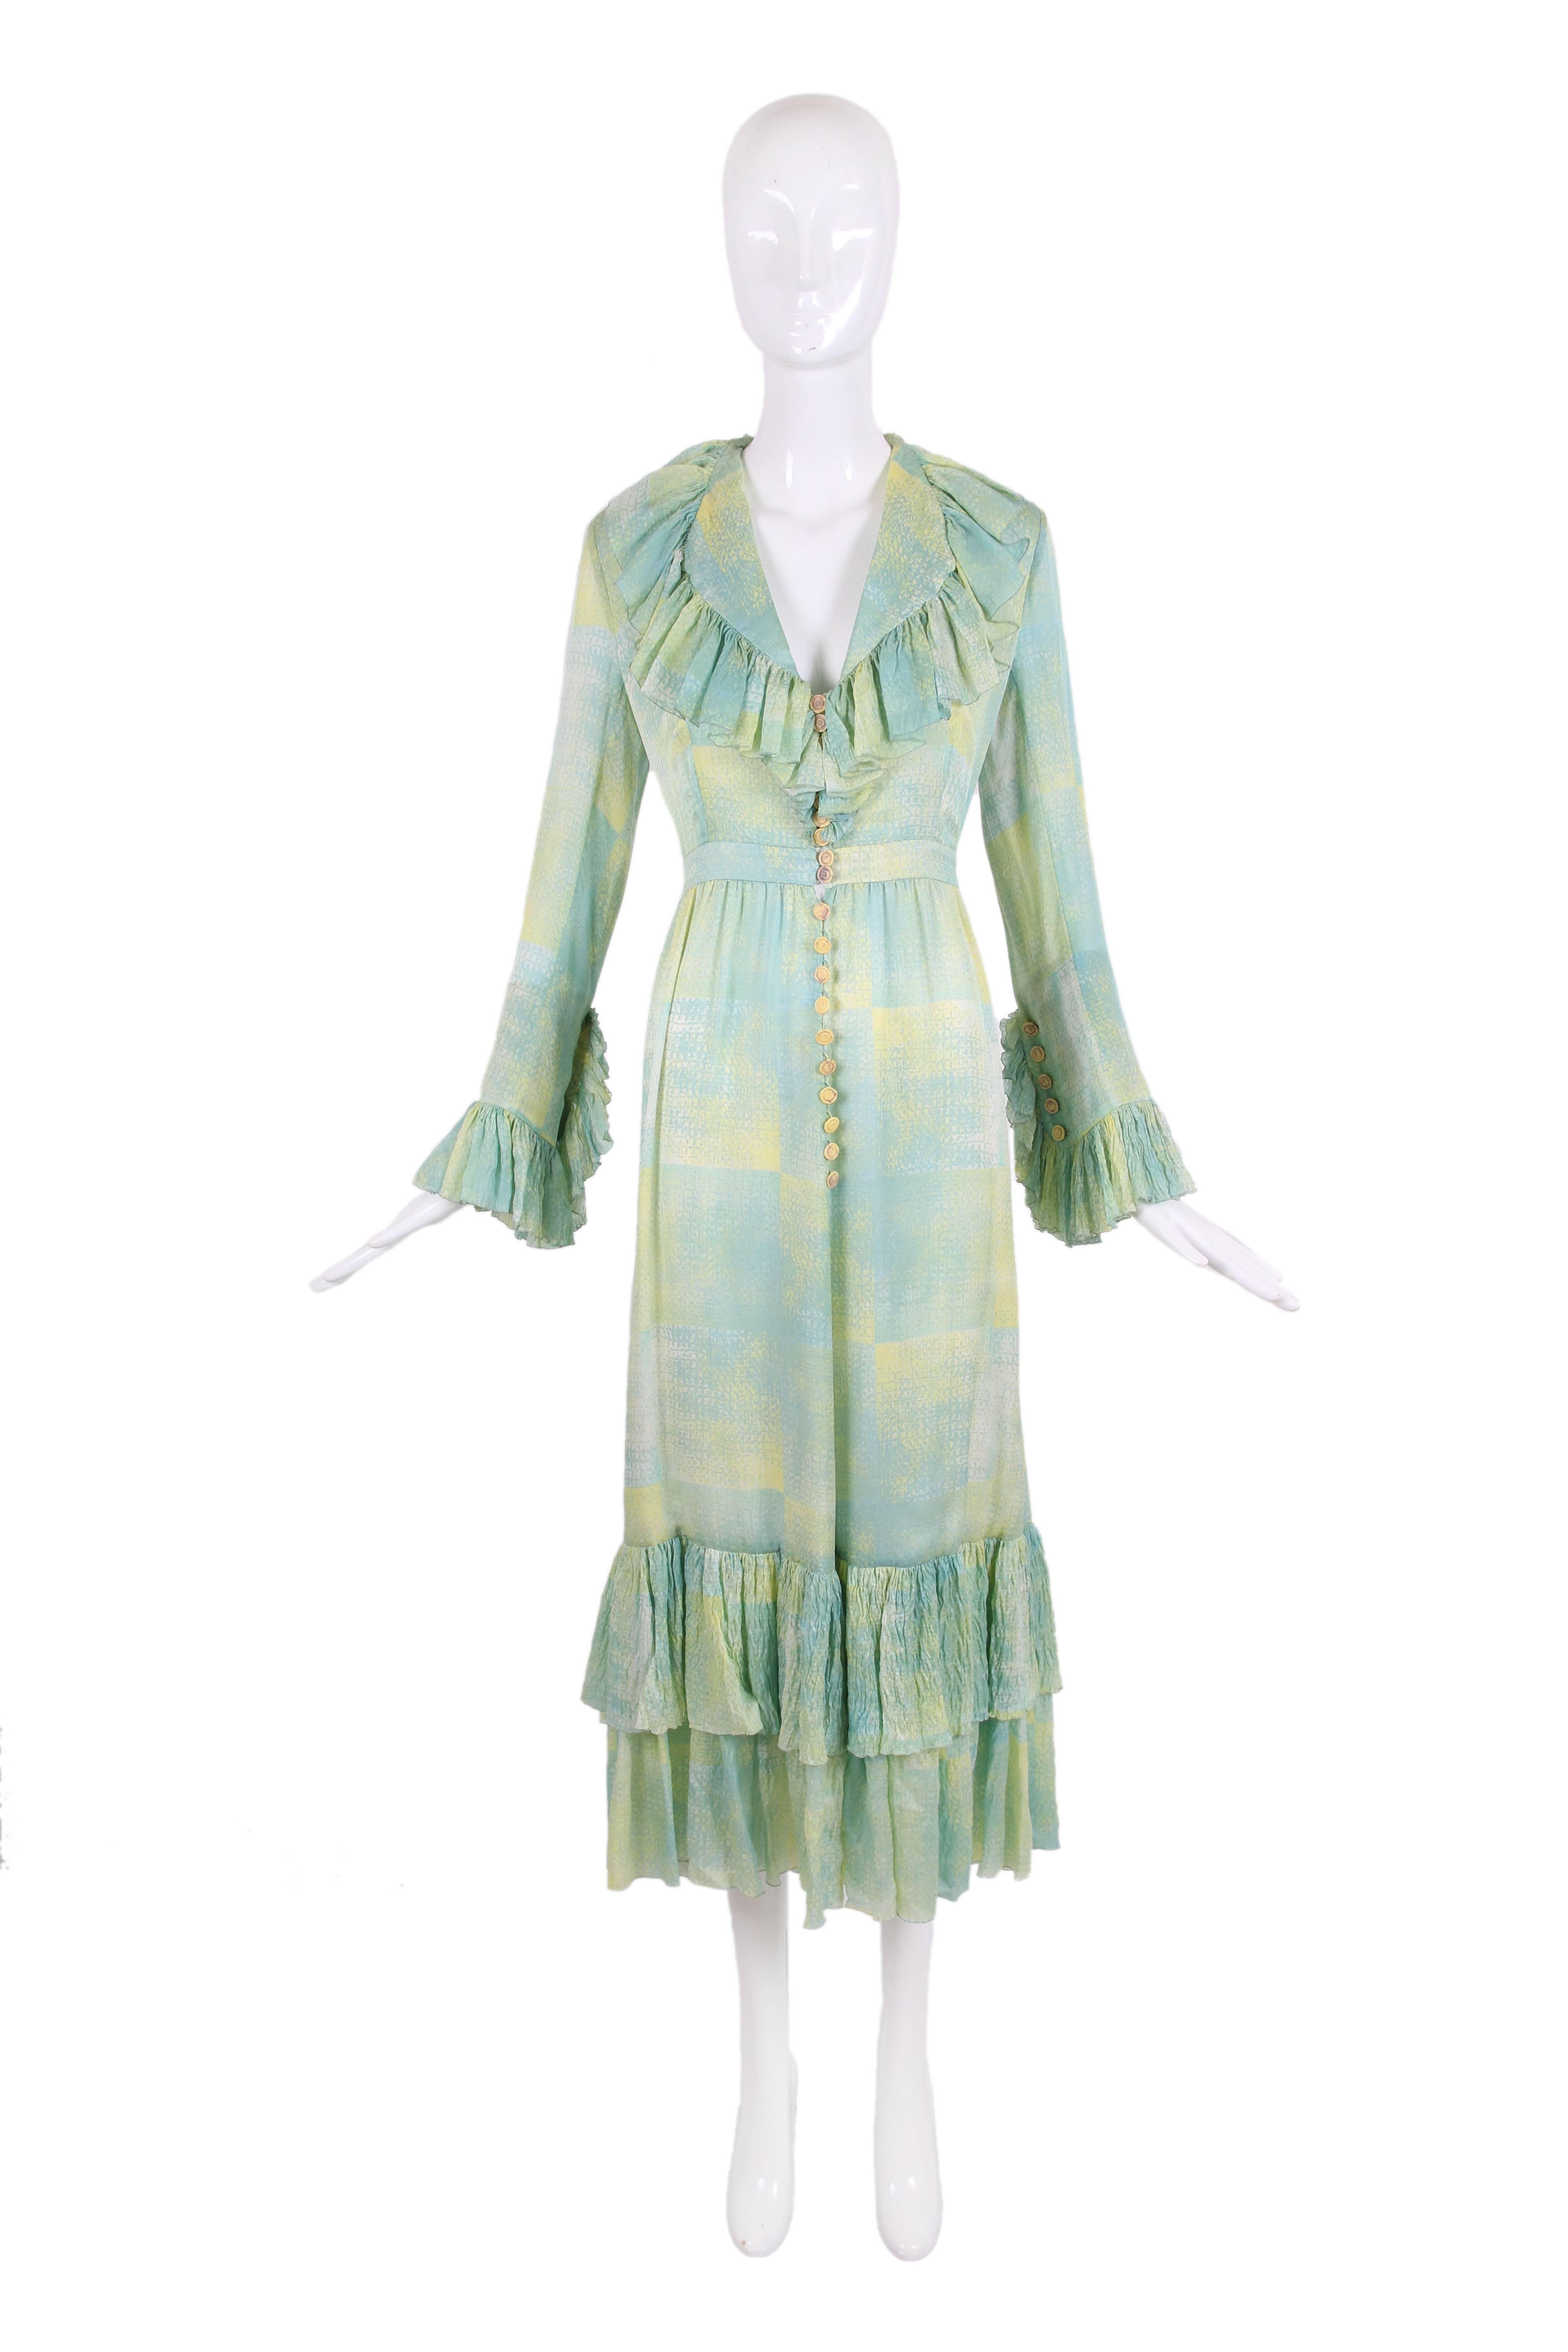 1970's Chloe silk abstract print dress in shades of pale green, blue and yellow, with a deep v-neckline and ruffle trim at collar, sleeve cuffs and tiered hem. Dress fastens up center front with yellow buttons and green fabric loopholes, with the